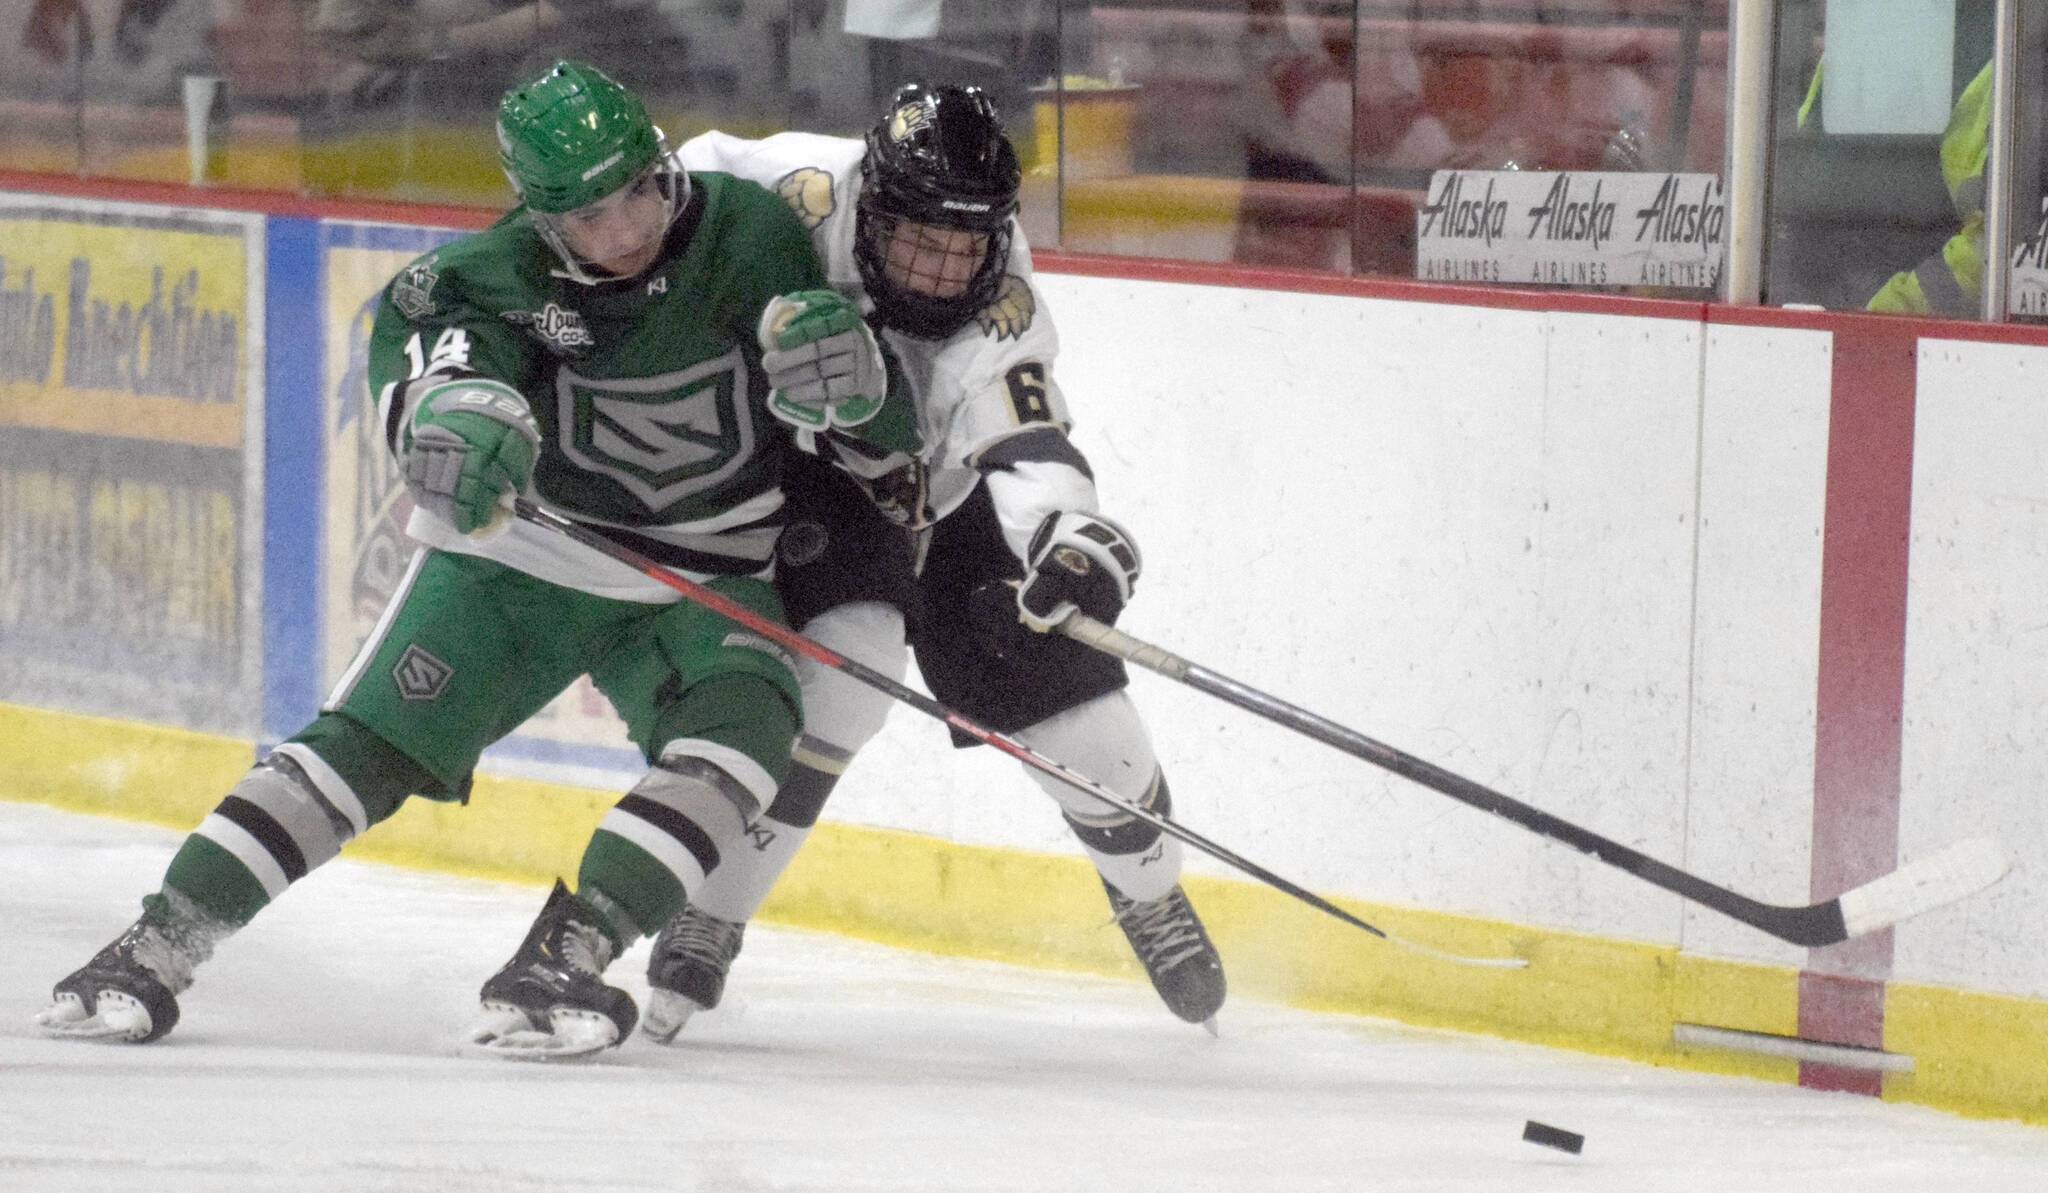 Jax Schauer of the Chippewa (Wisconsin) Steel and Dylan Evans of the Kenai River Brown Bears battle for the puck Friday, Oct. 21, 2021, at the Soldotna Regional Sports Complex in Soldotna, Alaska. (Photo by Jeff Helminiak/Peninsula Clarion)